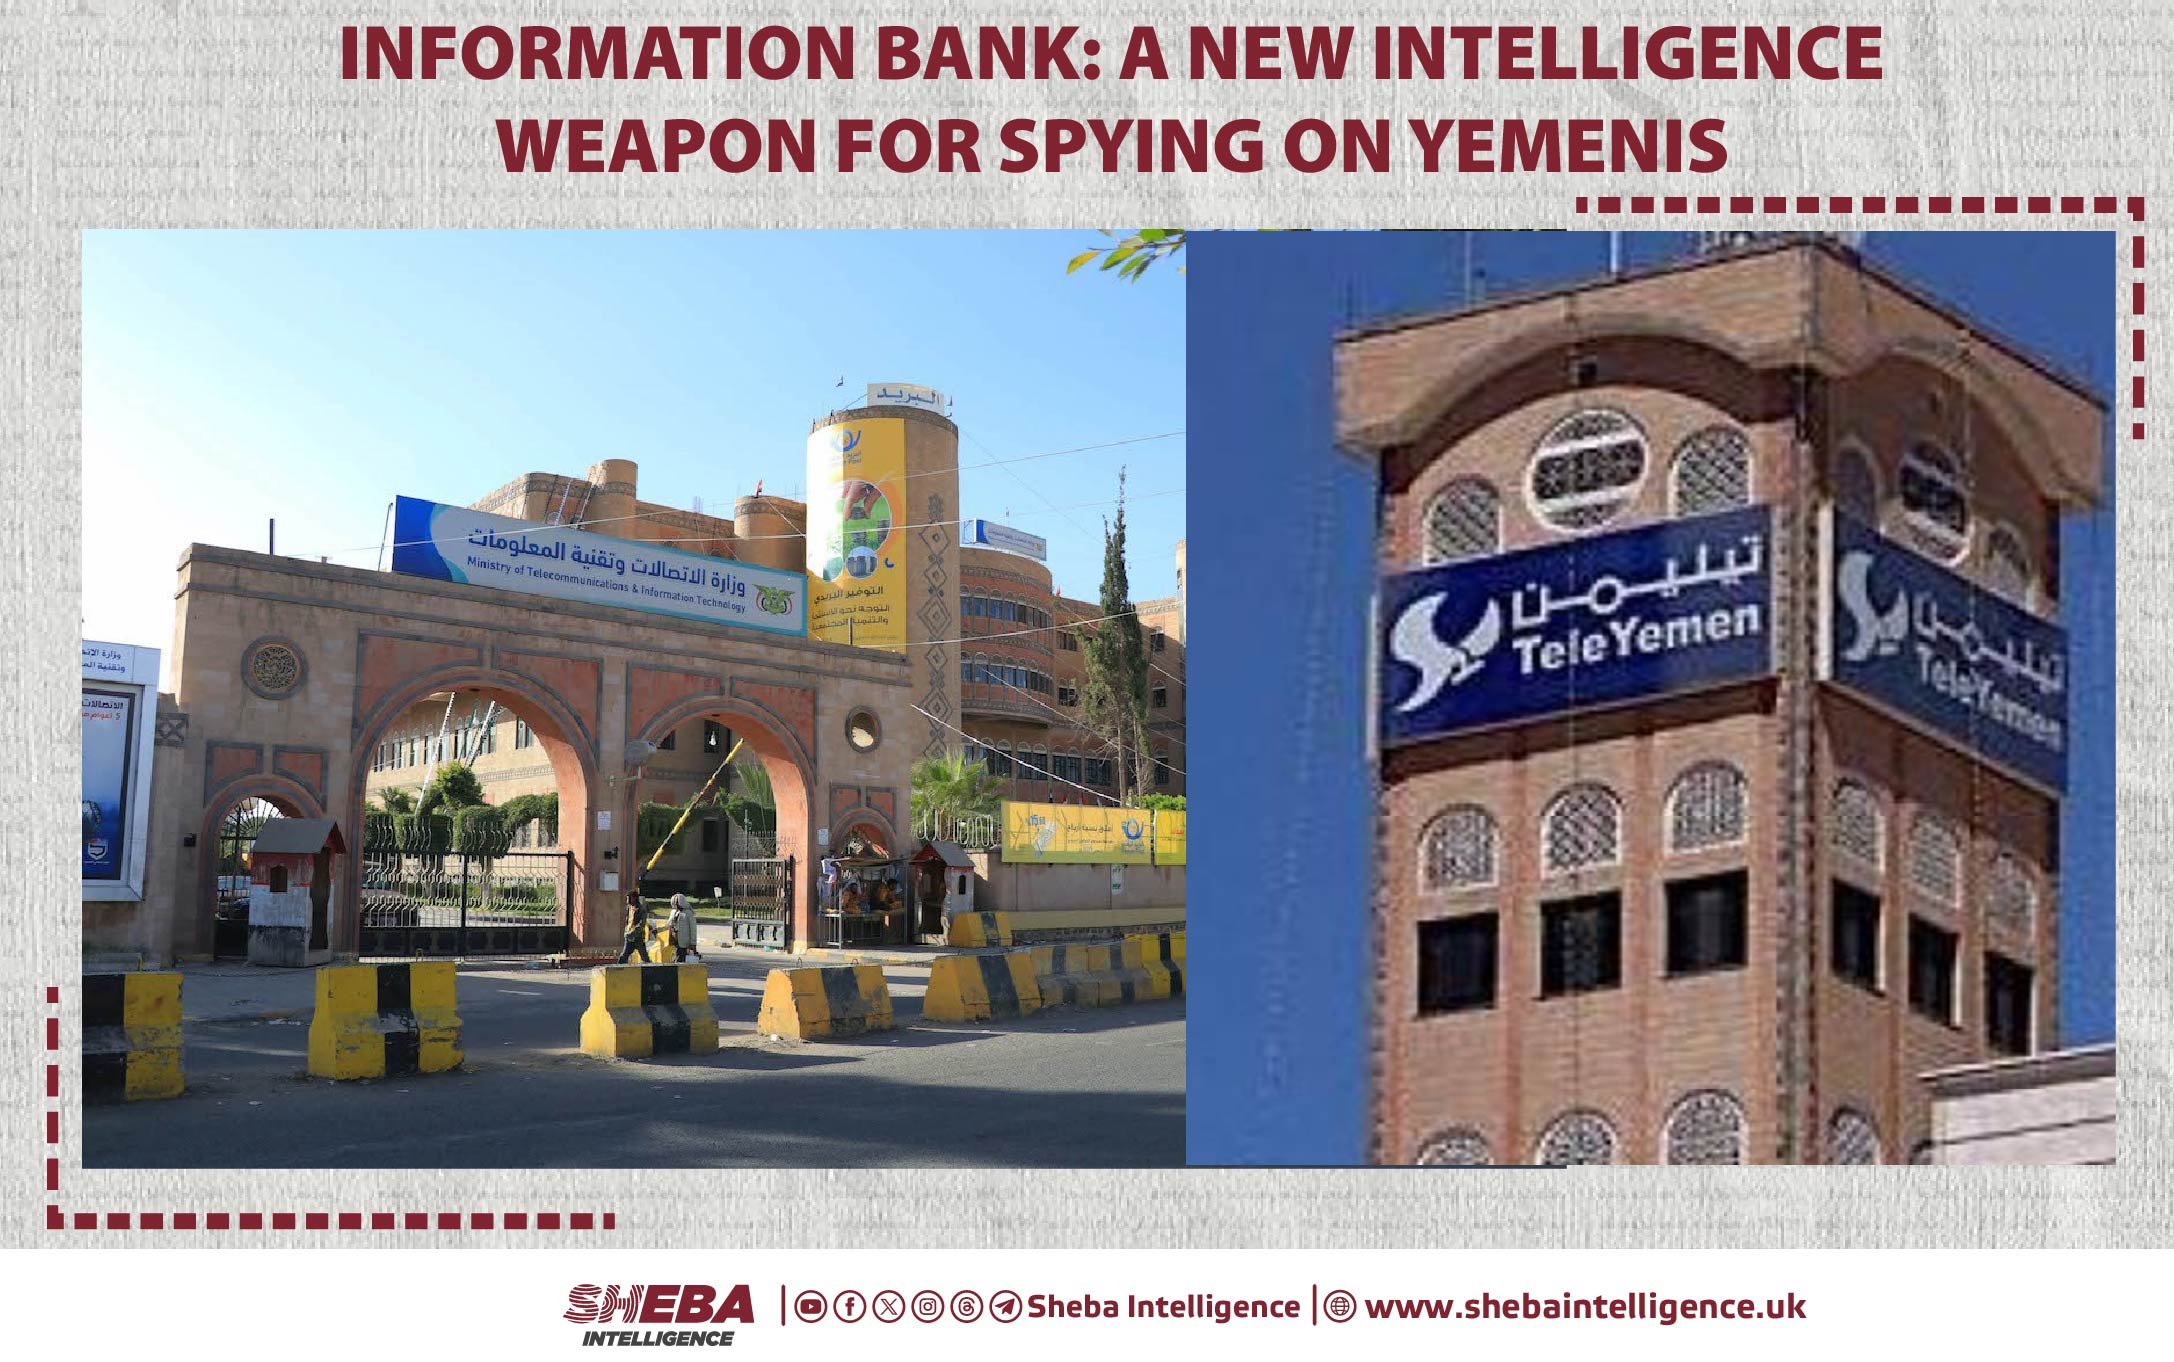 Information Bank: A New Intelligence Weapon for Spying on Yemenis